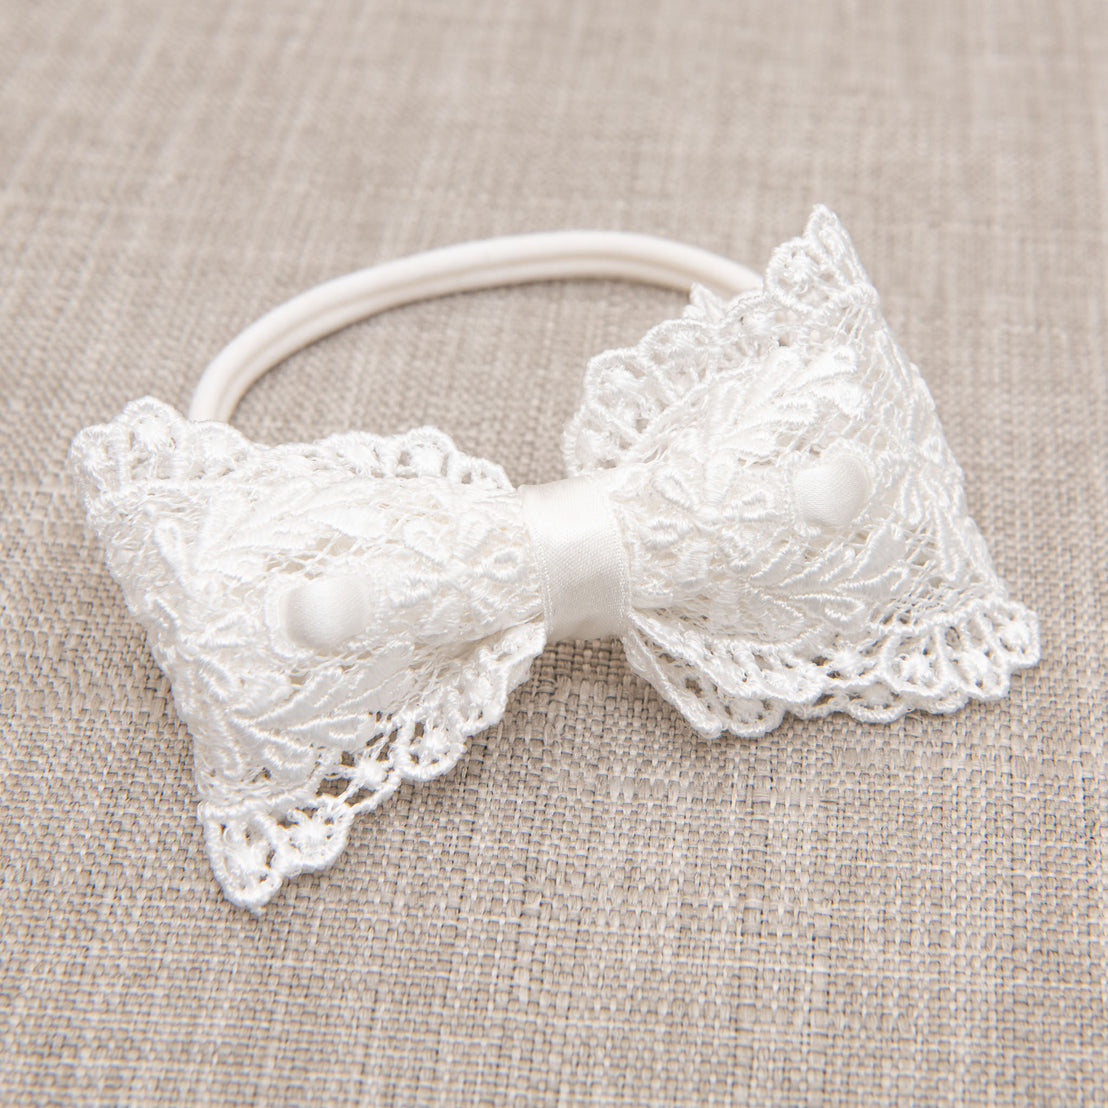 An upscale Madeline Lace Bow Headband, displayed against a textured beige fabric background.